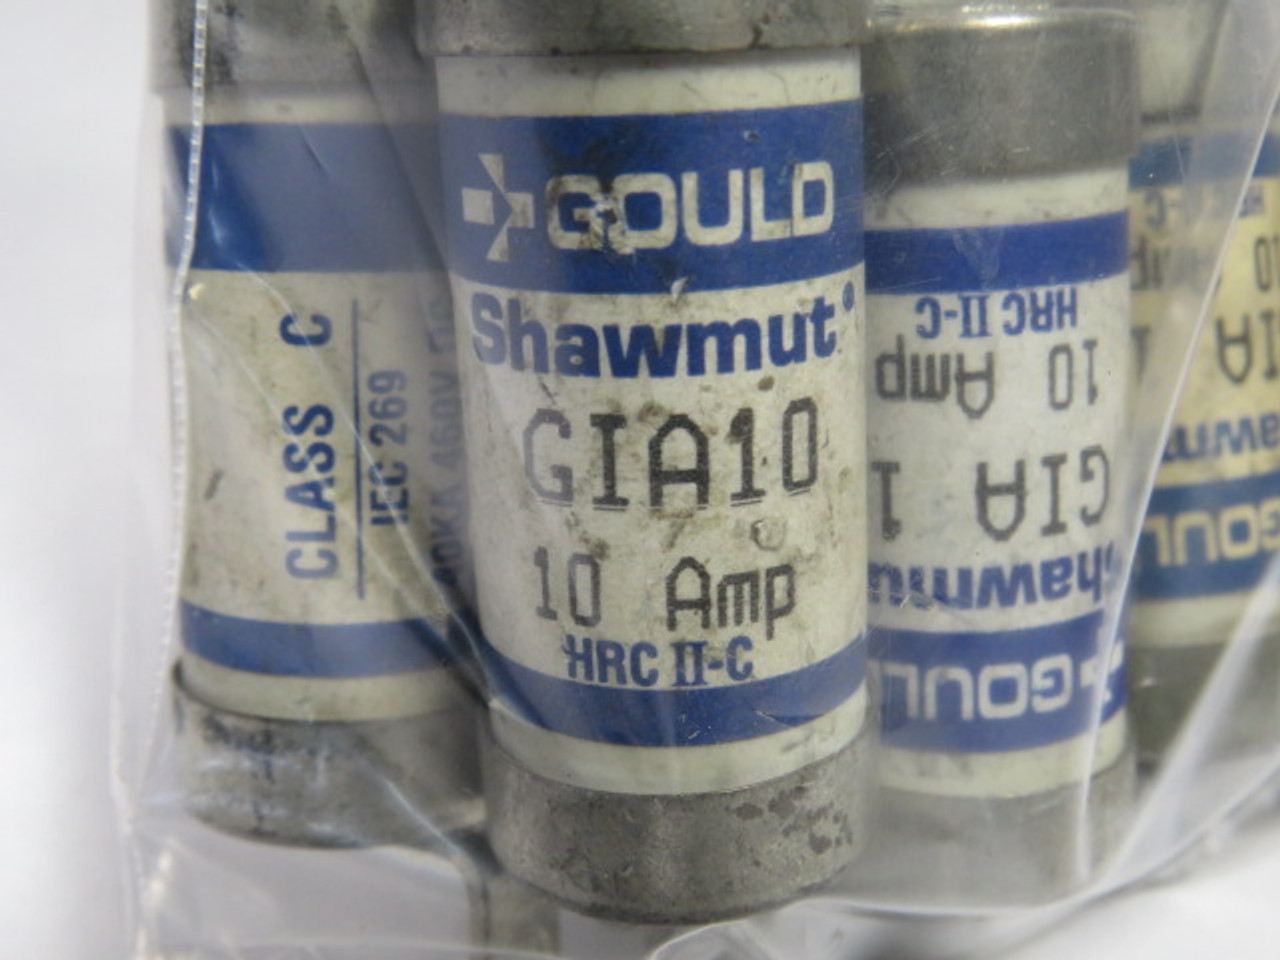 Gould Shawmut GIA-10 Bolt-on Fuse 10A 460Vdc Lot of 10 USED